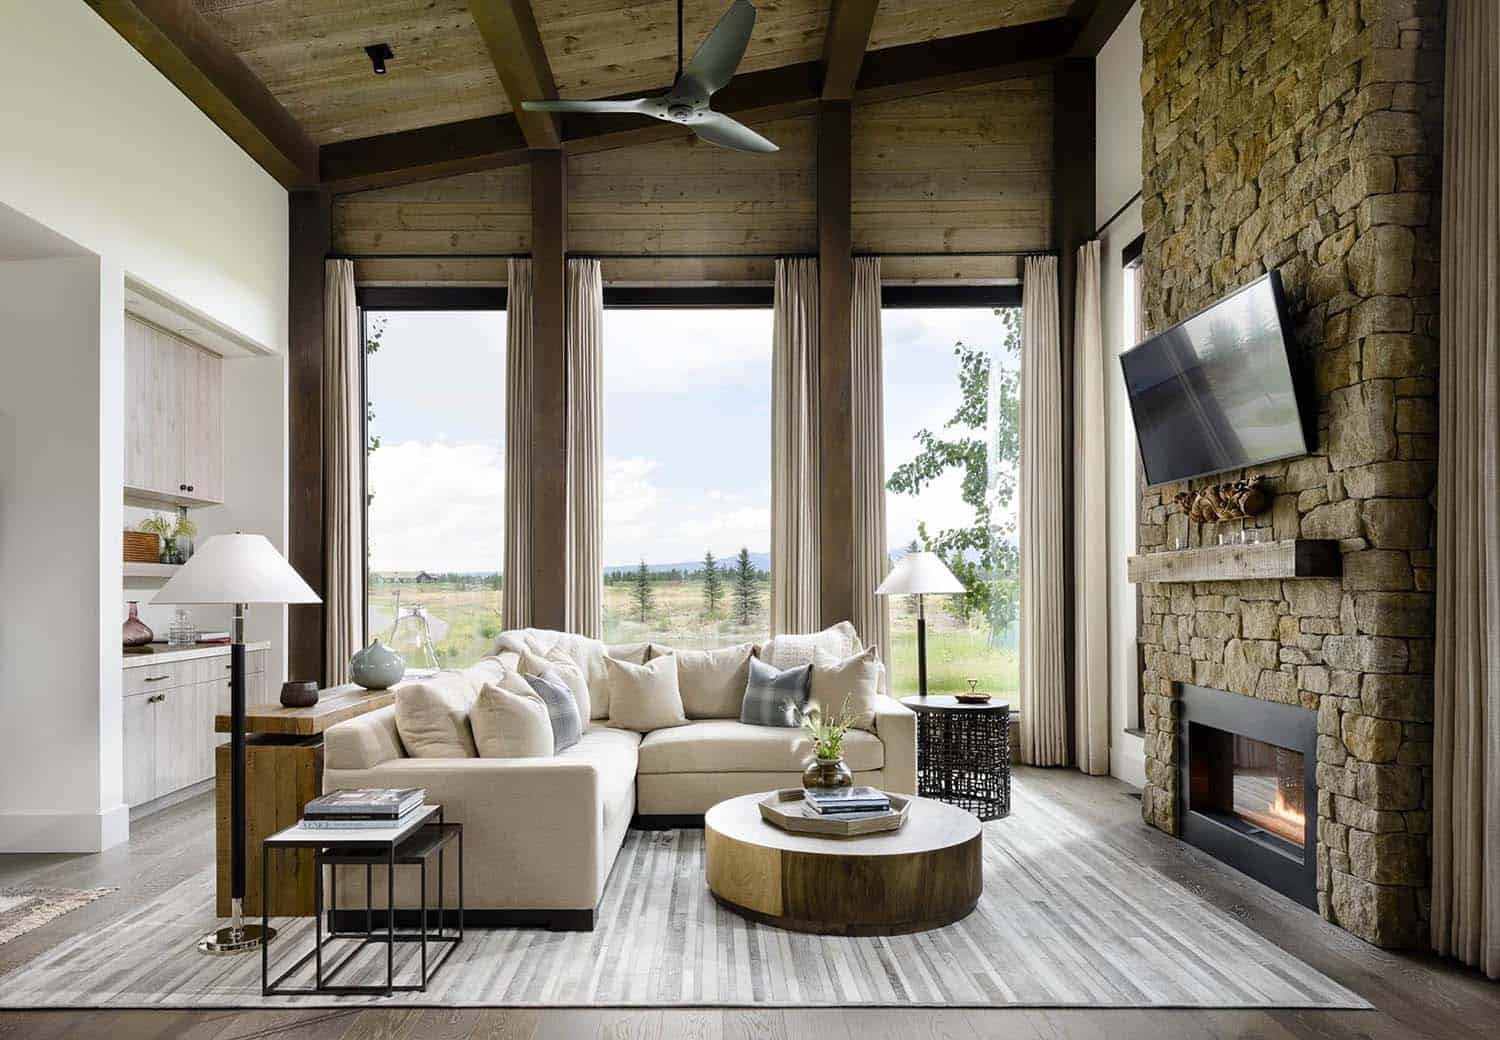 A modern timber frame cabin with breathtaking views of the Teton Mountains